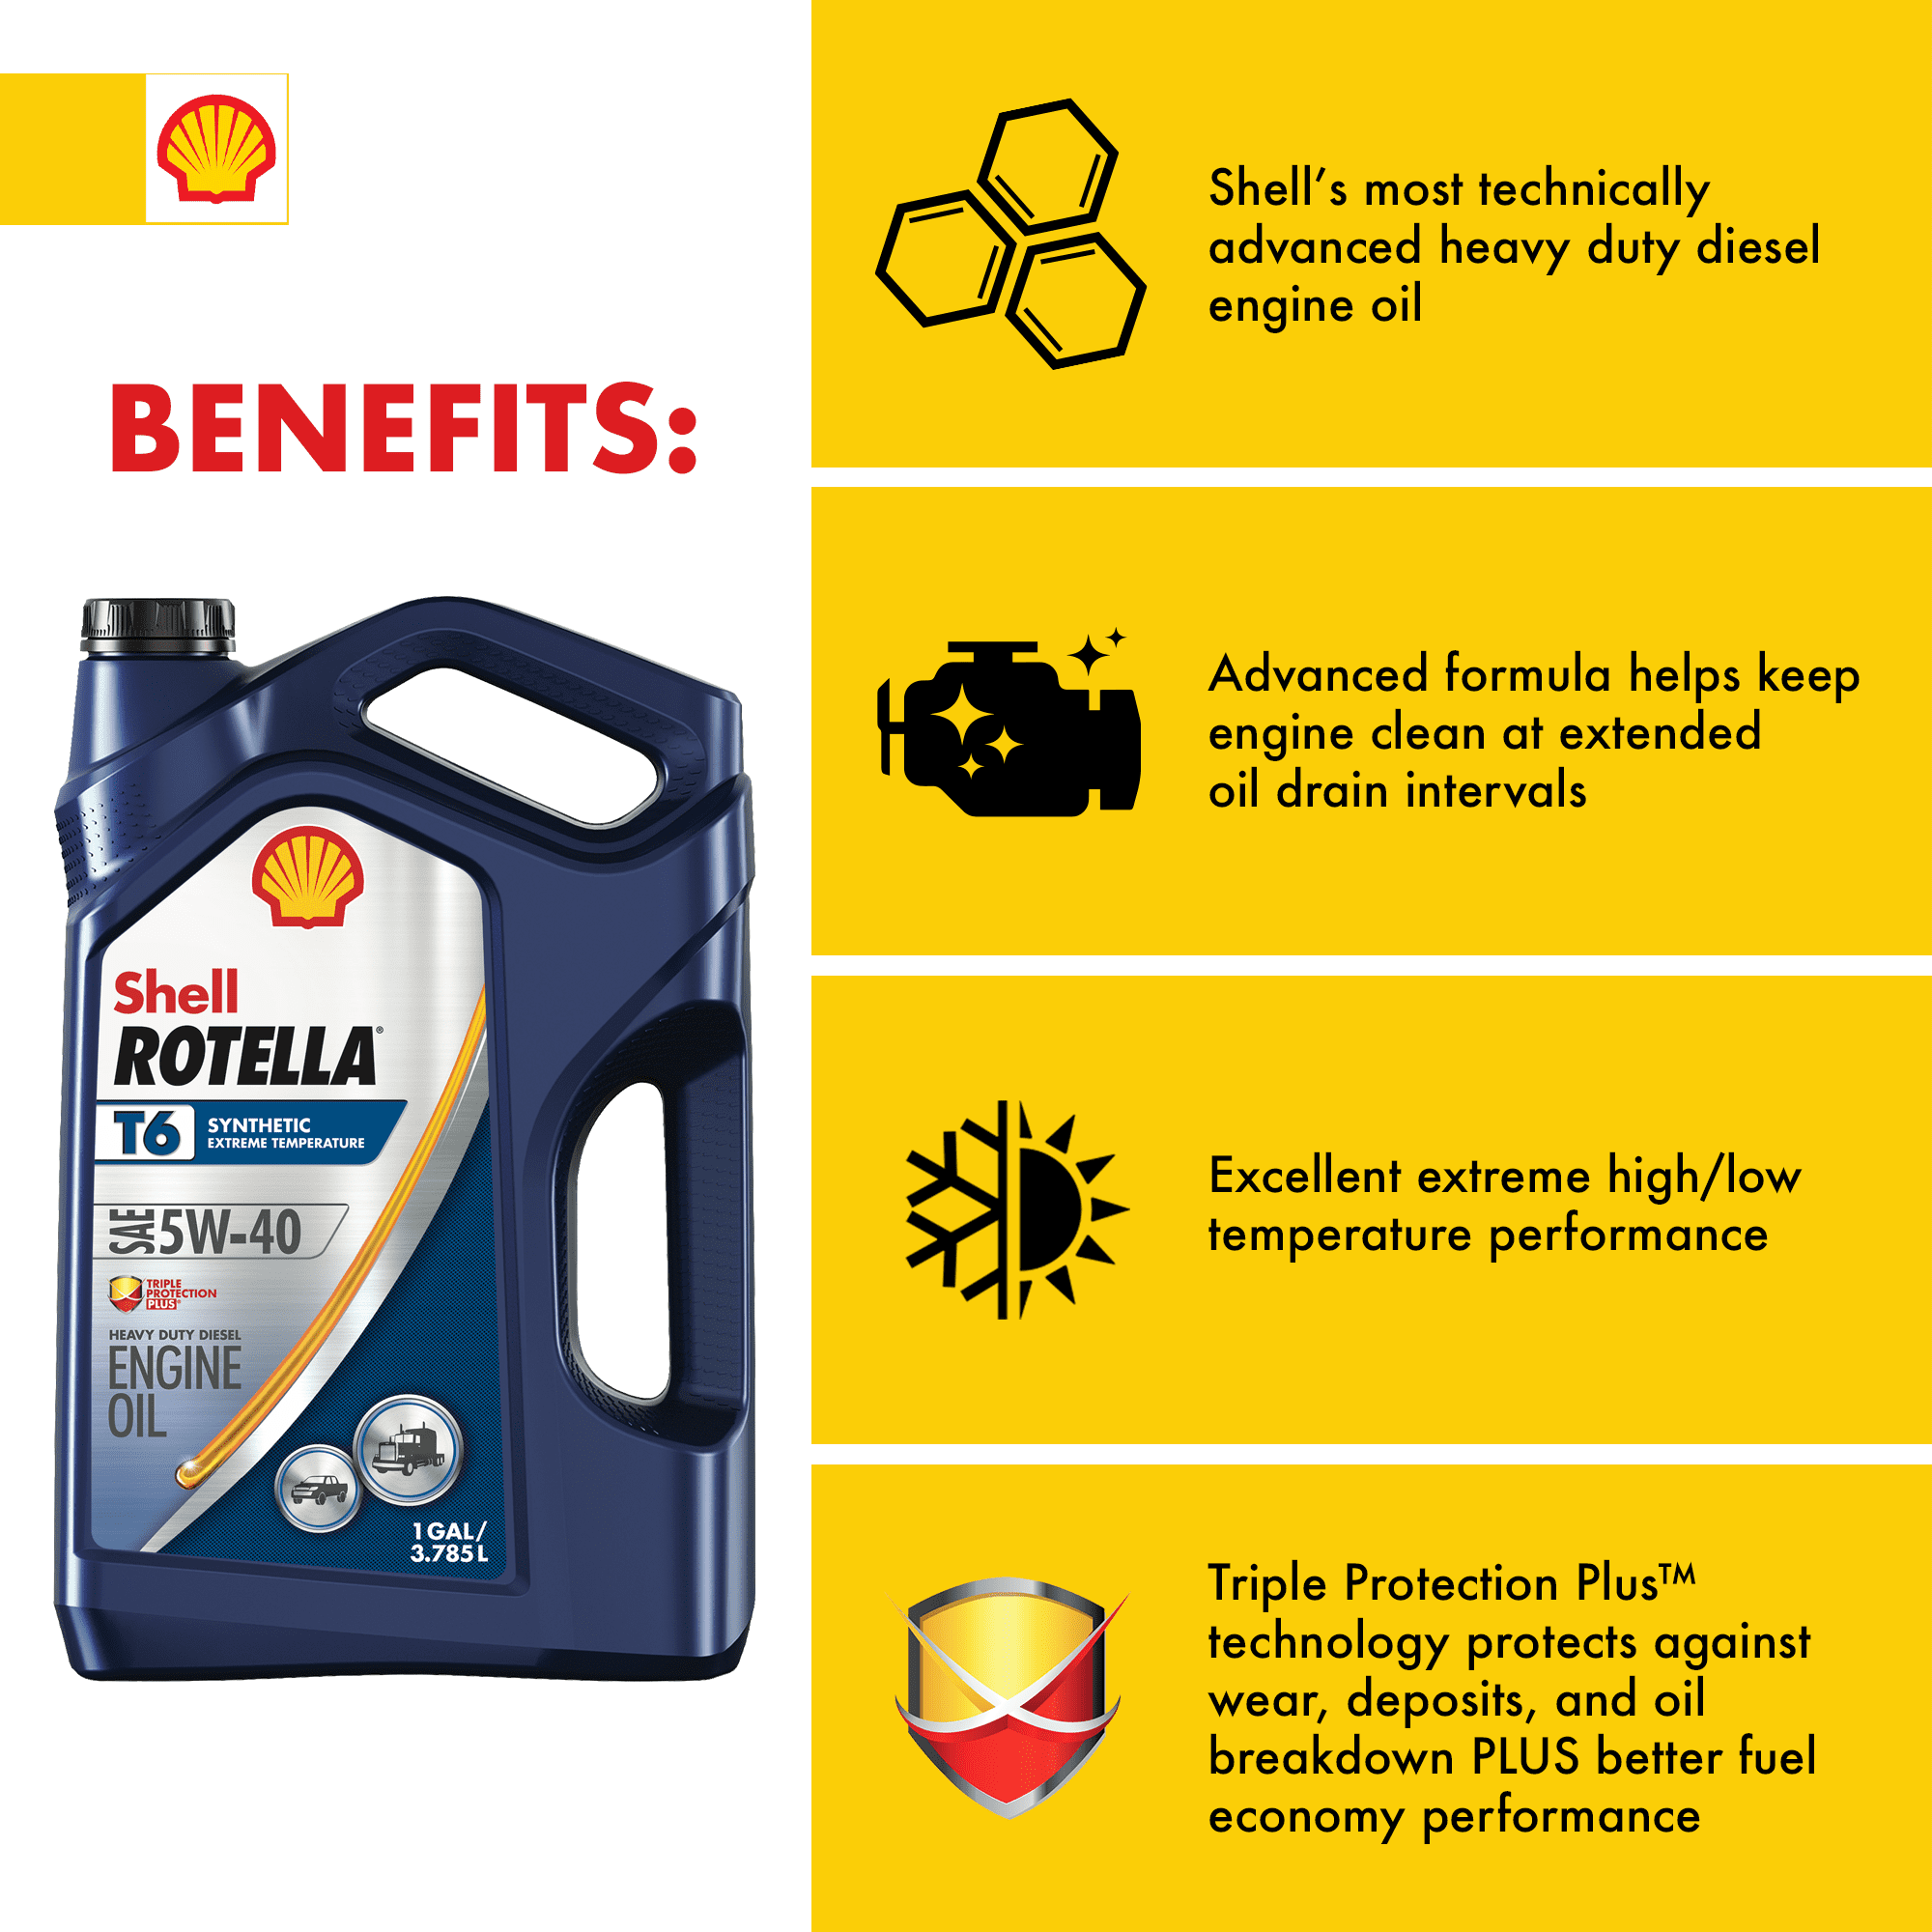 Shell Rotella T6 Full Synthetic 5W-40 Diesel Engine Oil, 1 Gallon, 3 Pack - 1